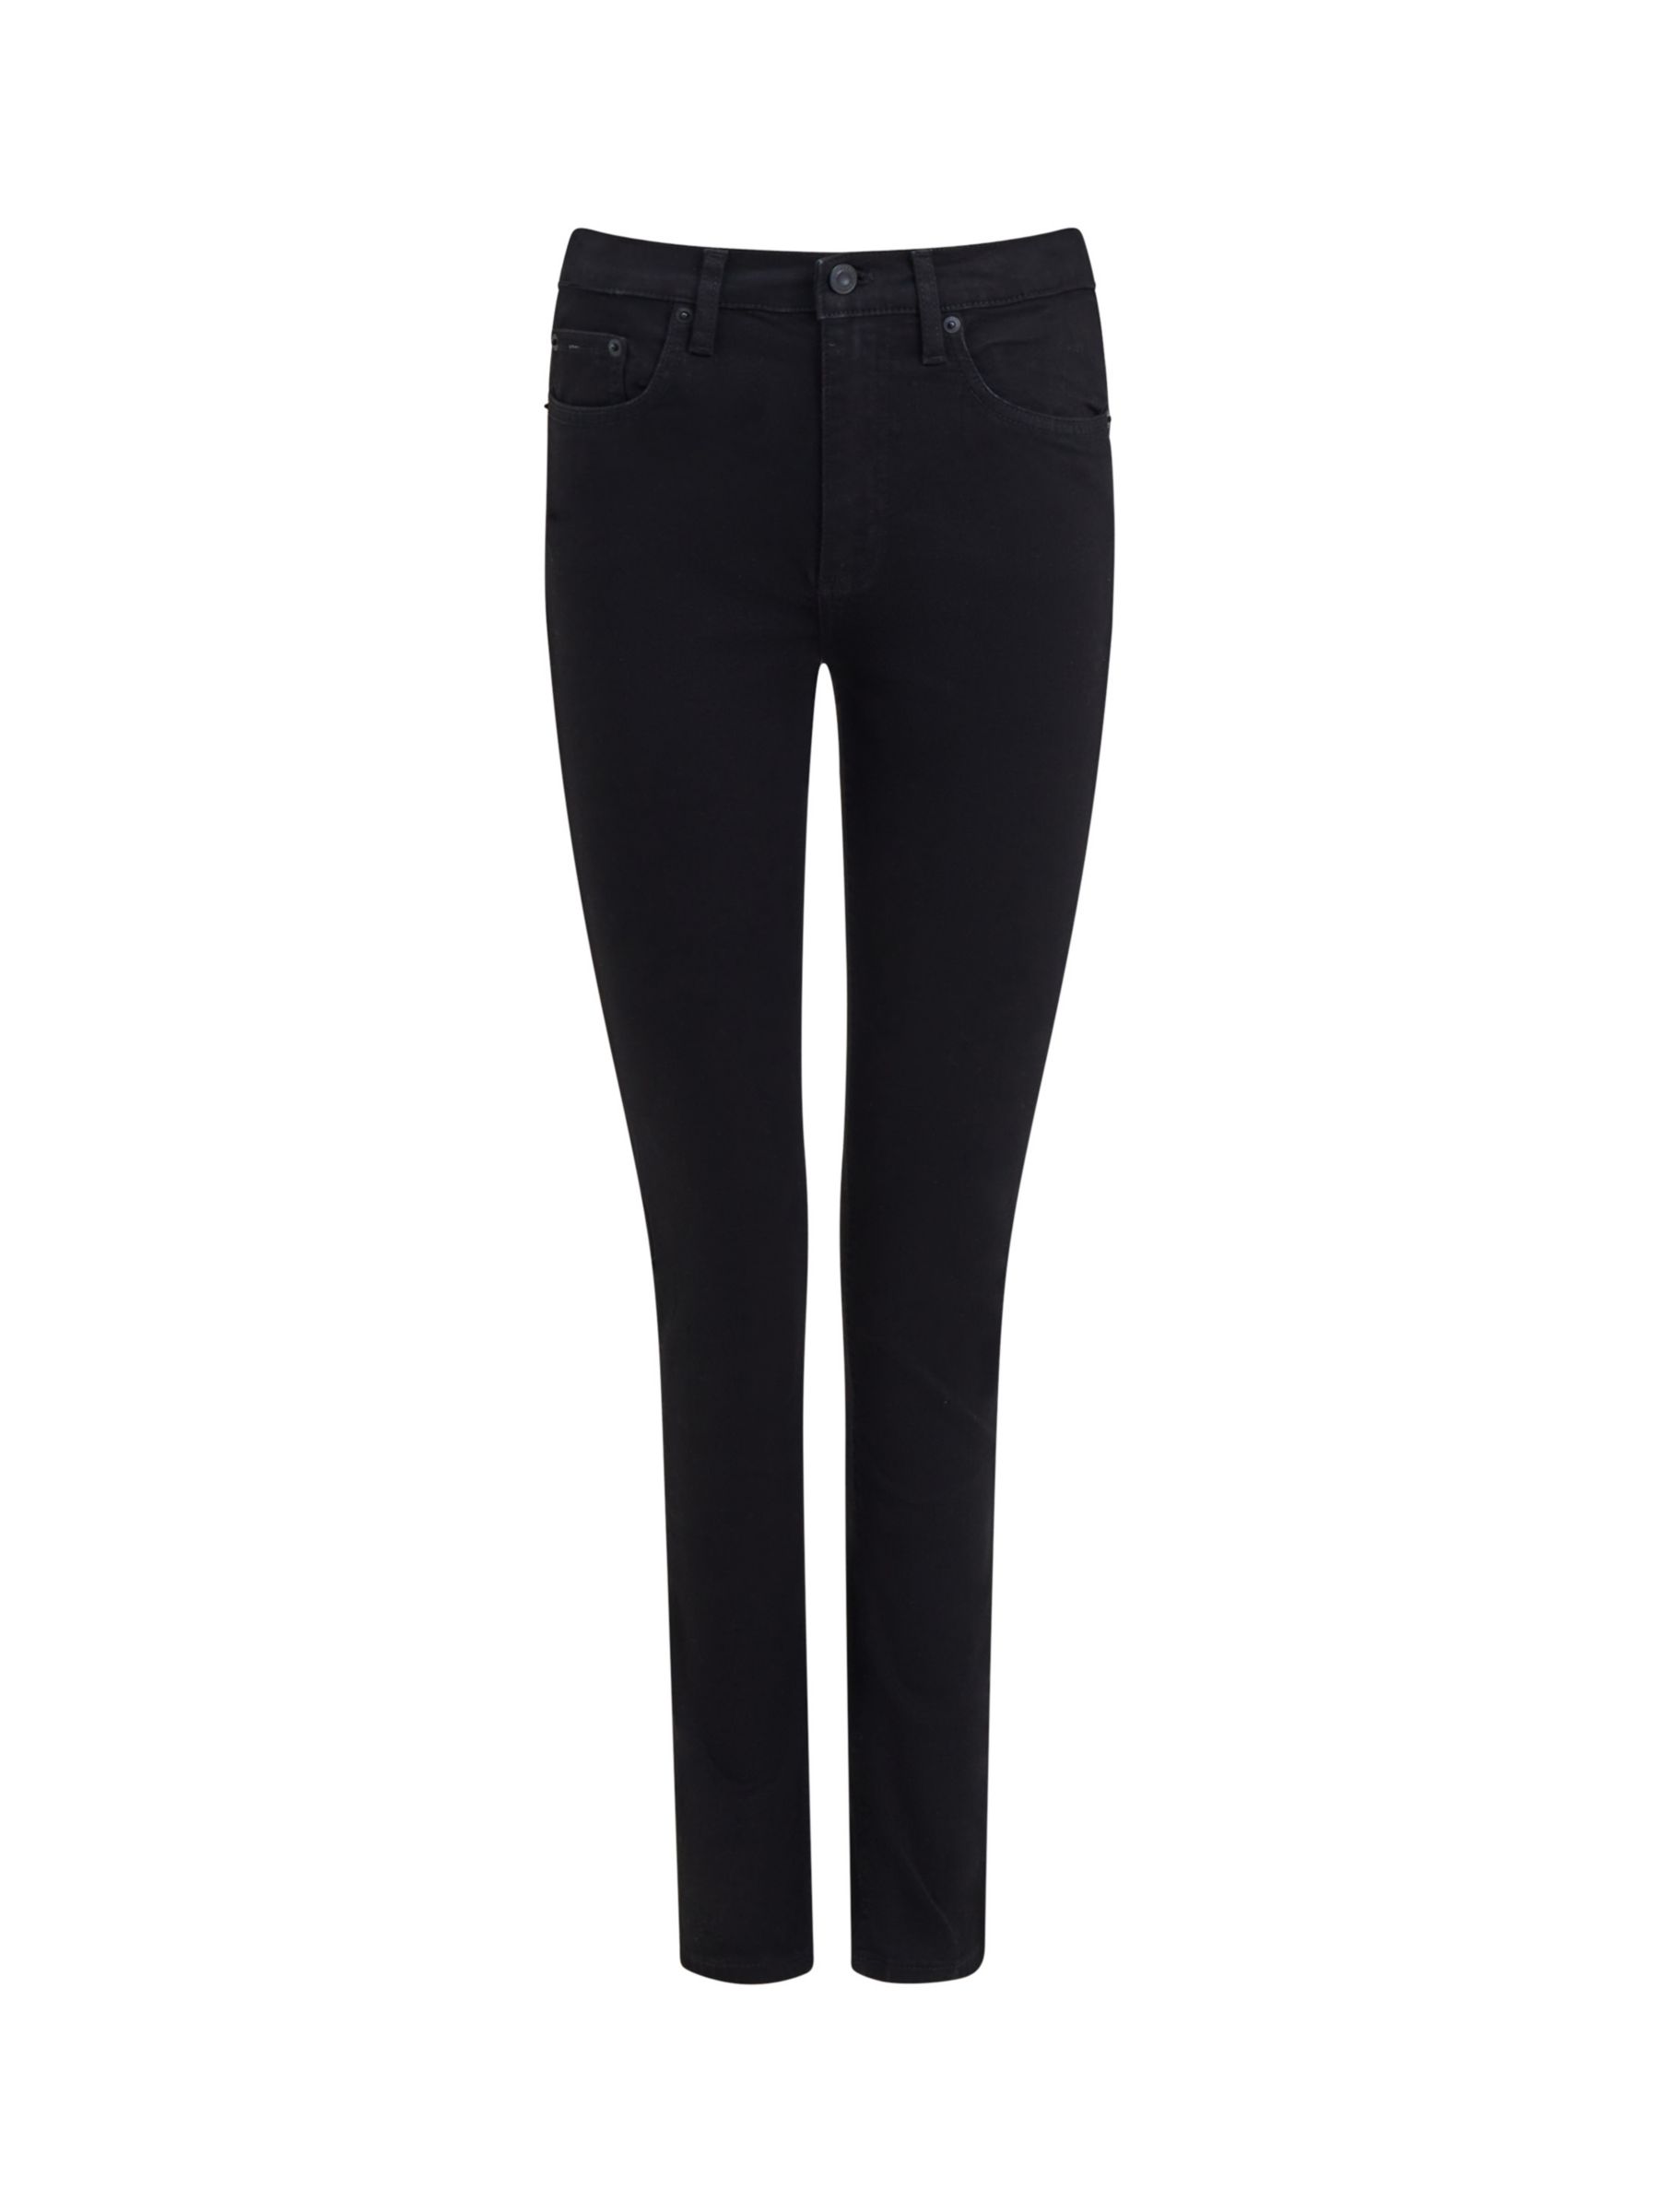 French Connection Rebound Response Skinny Jeans, Black at John Lewis ...